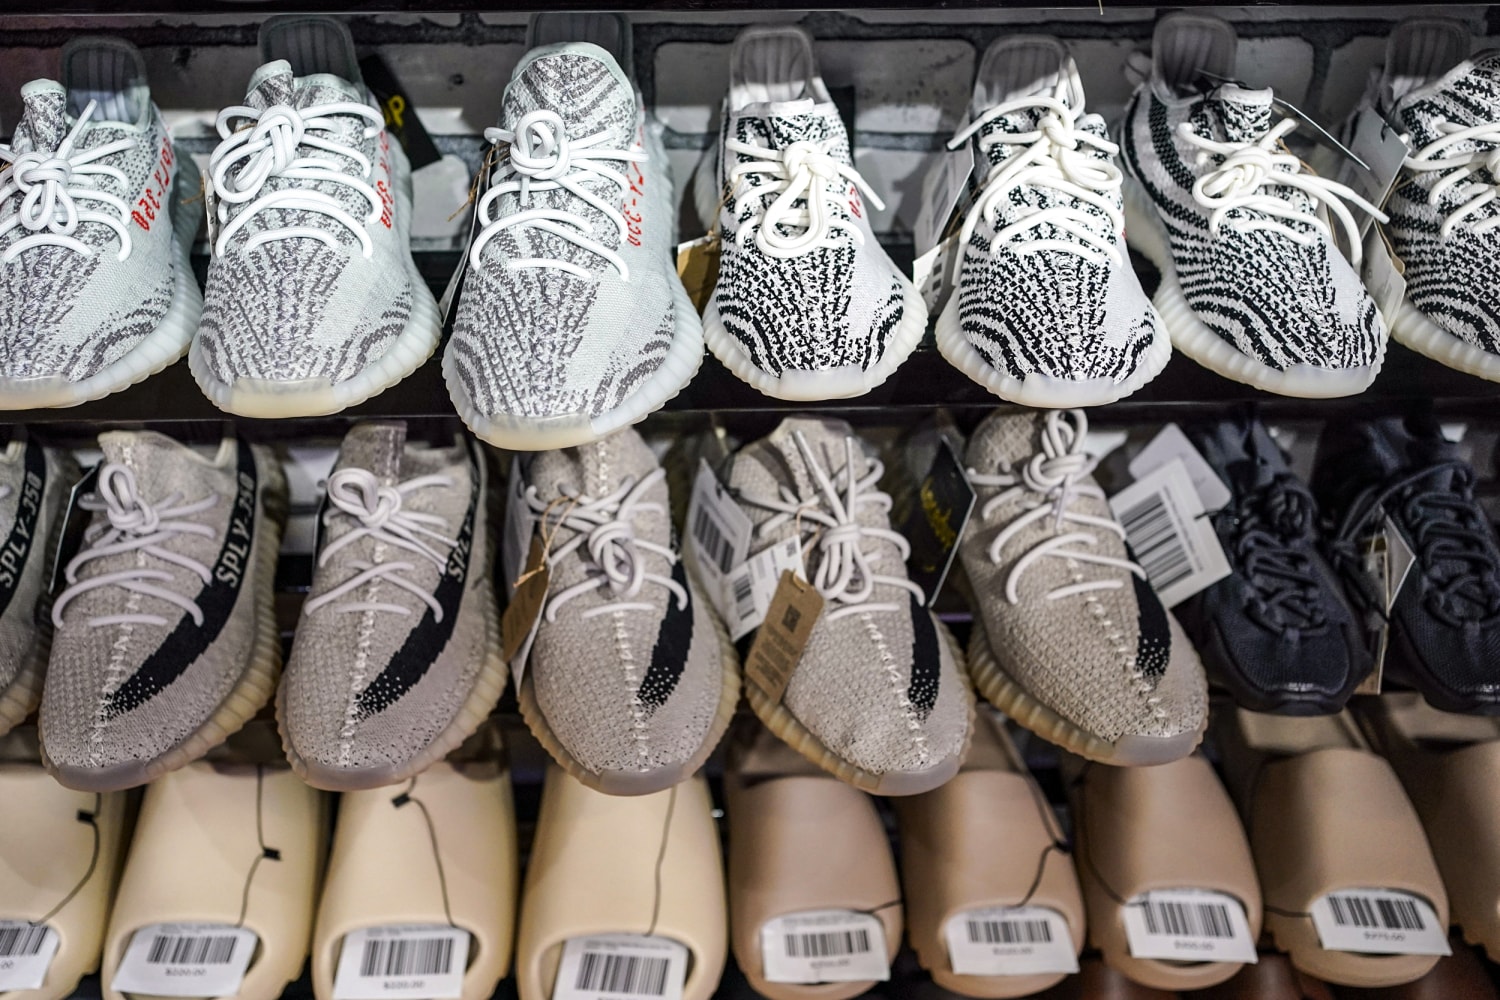 Adidas selling Yeezy shoes again after cutting ties Kanye